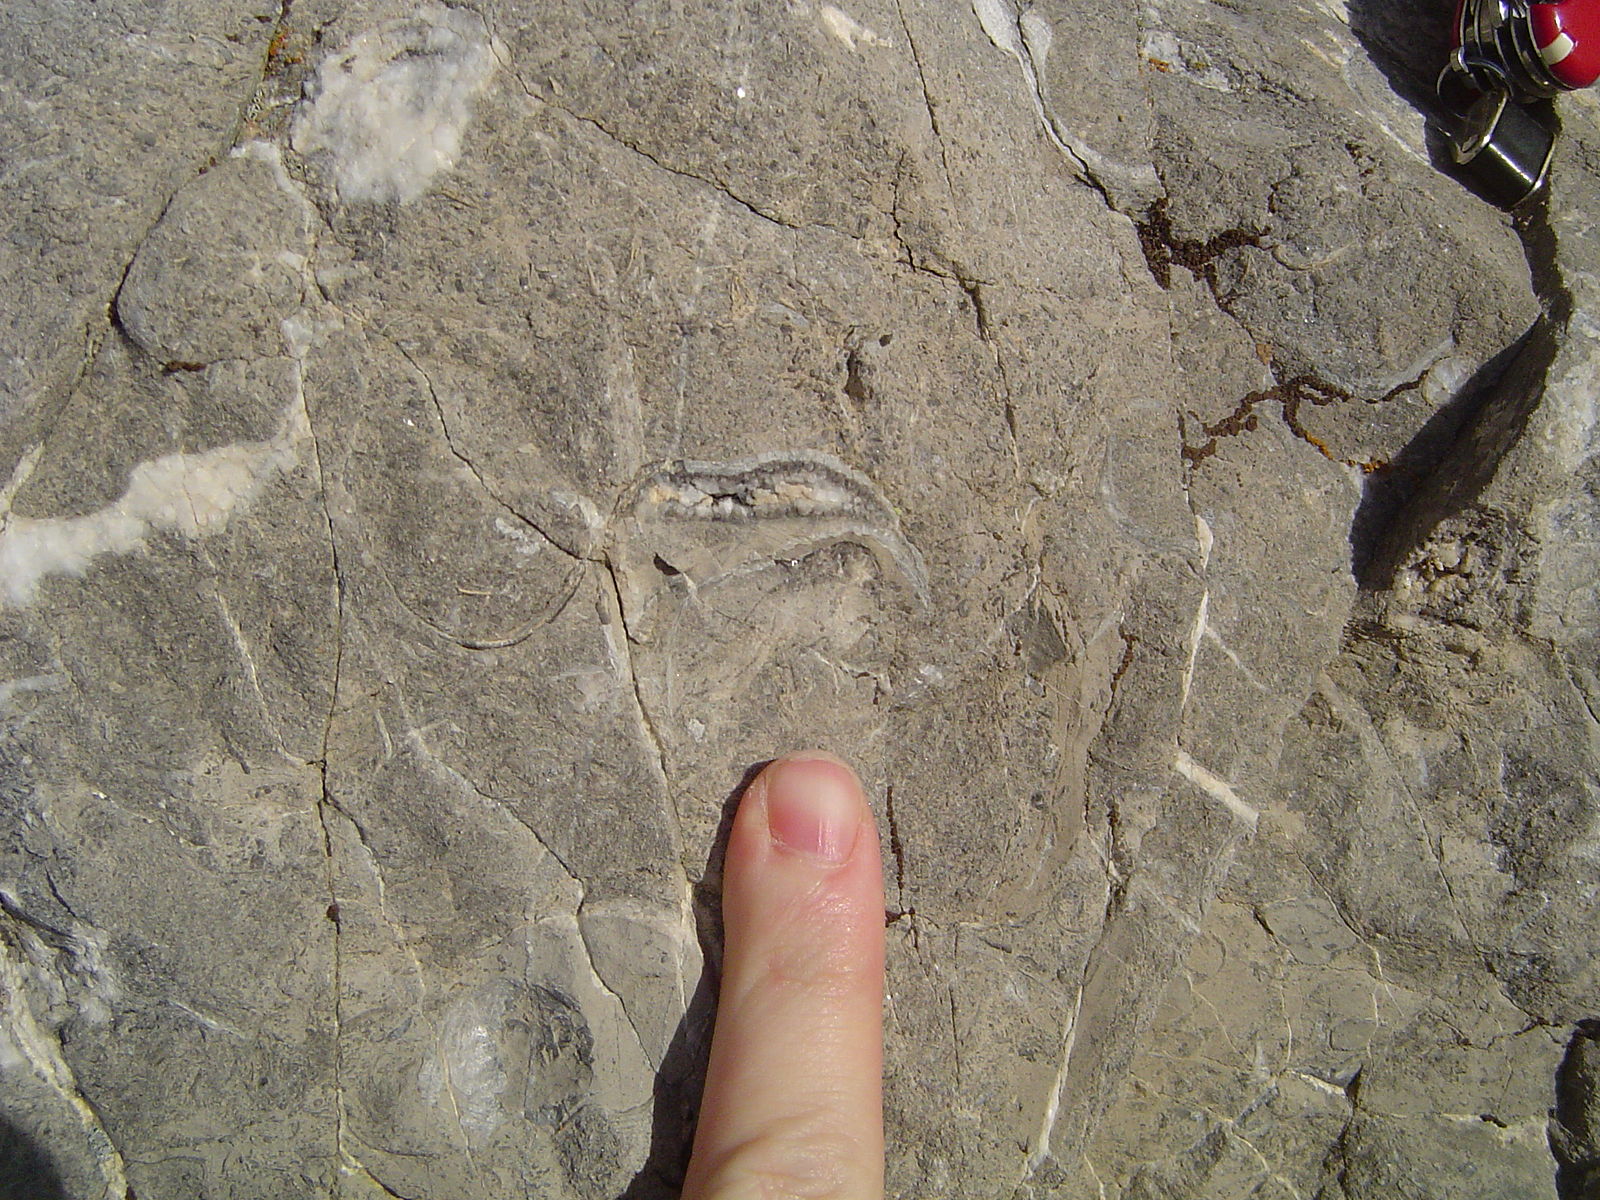 Gray rock that contains a cross sectional view of a clam fossil that is partially filled with tan sediment and partially filled with white calcite; the line between the sediment and calcite is roughly horizontal; a person's finger points to the fossil.